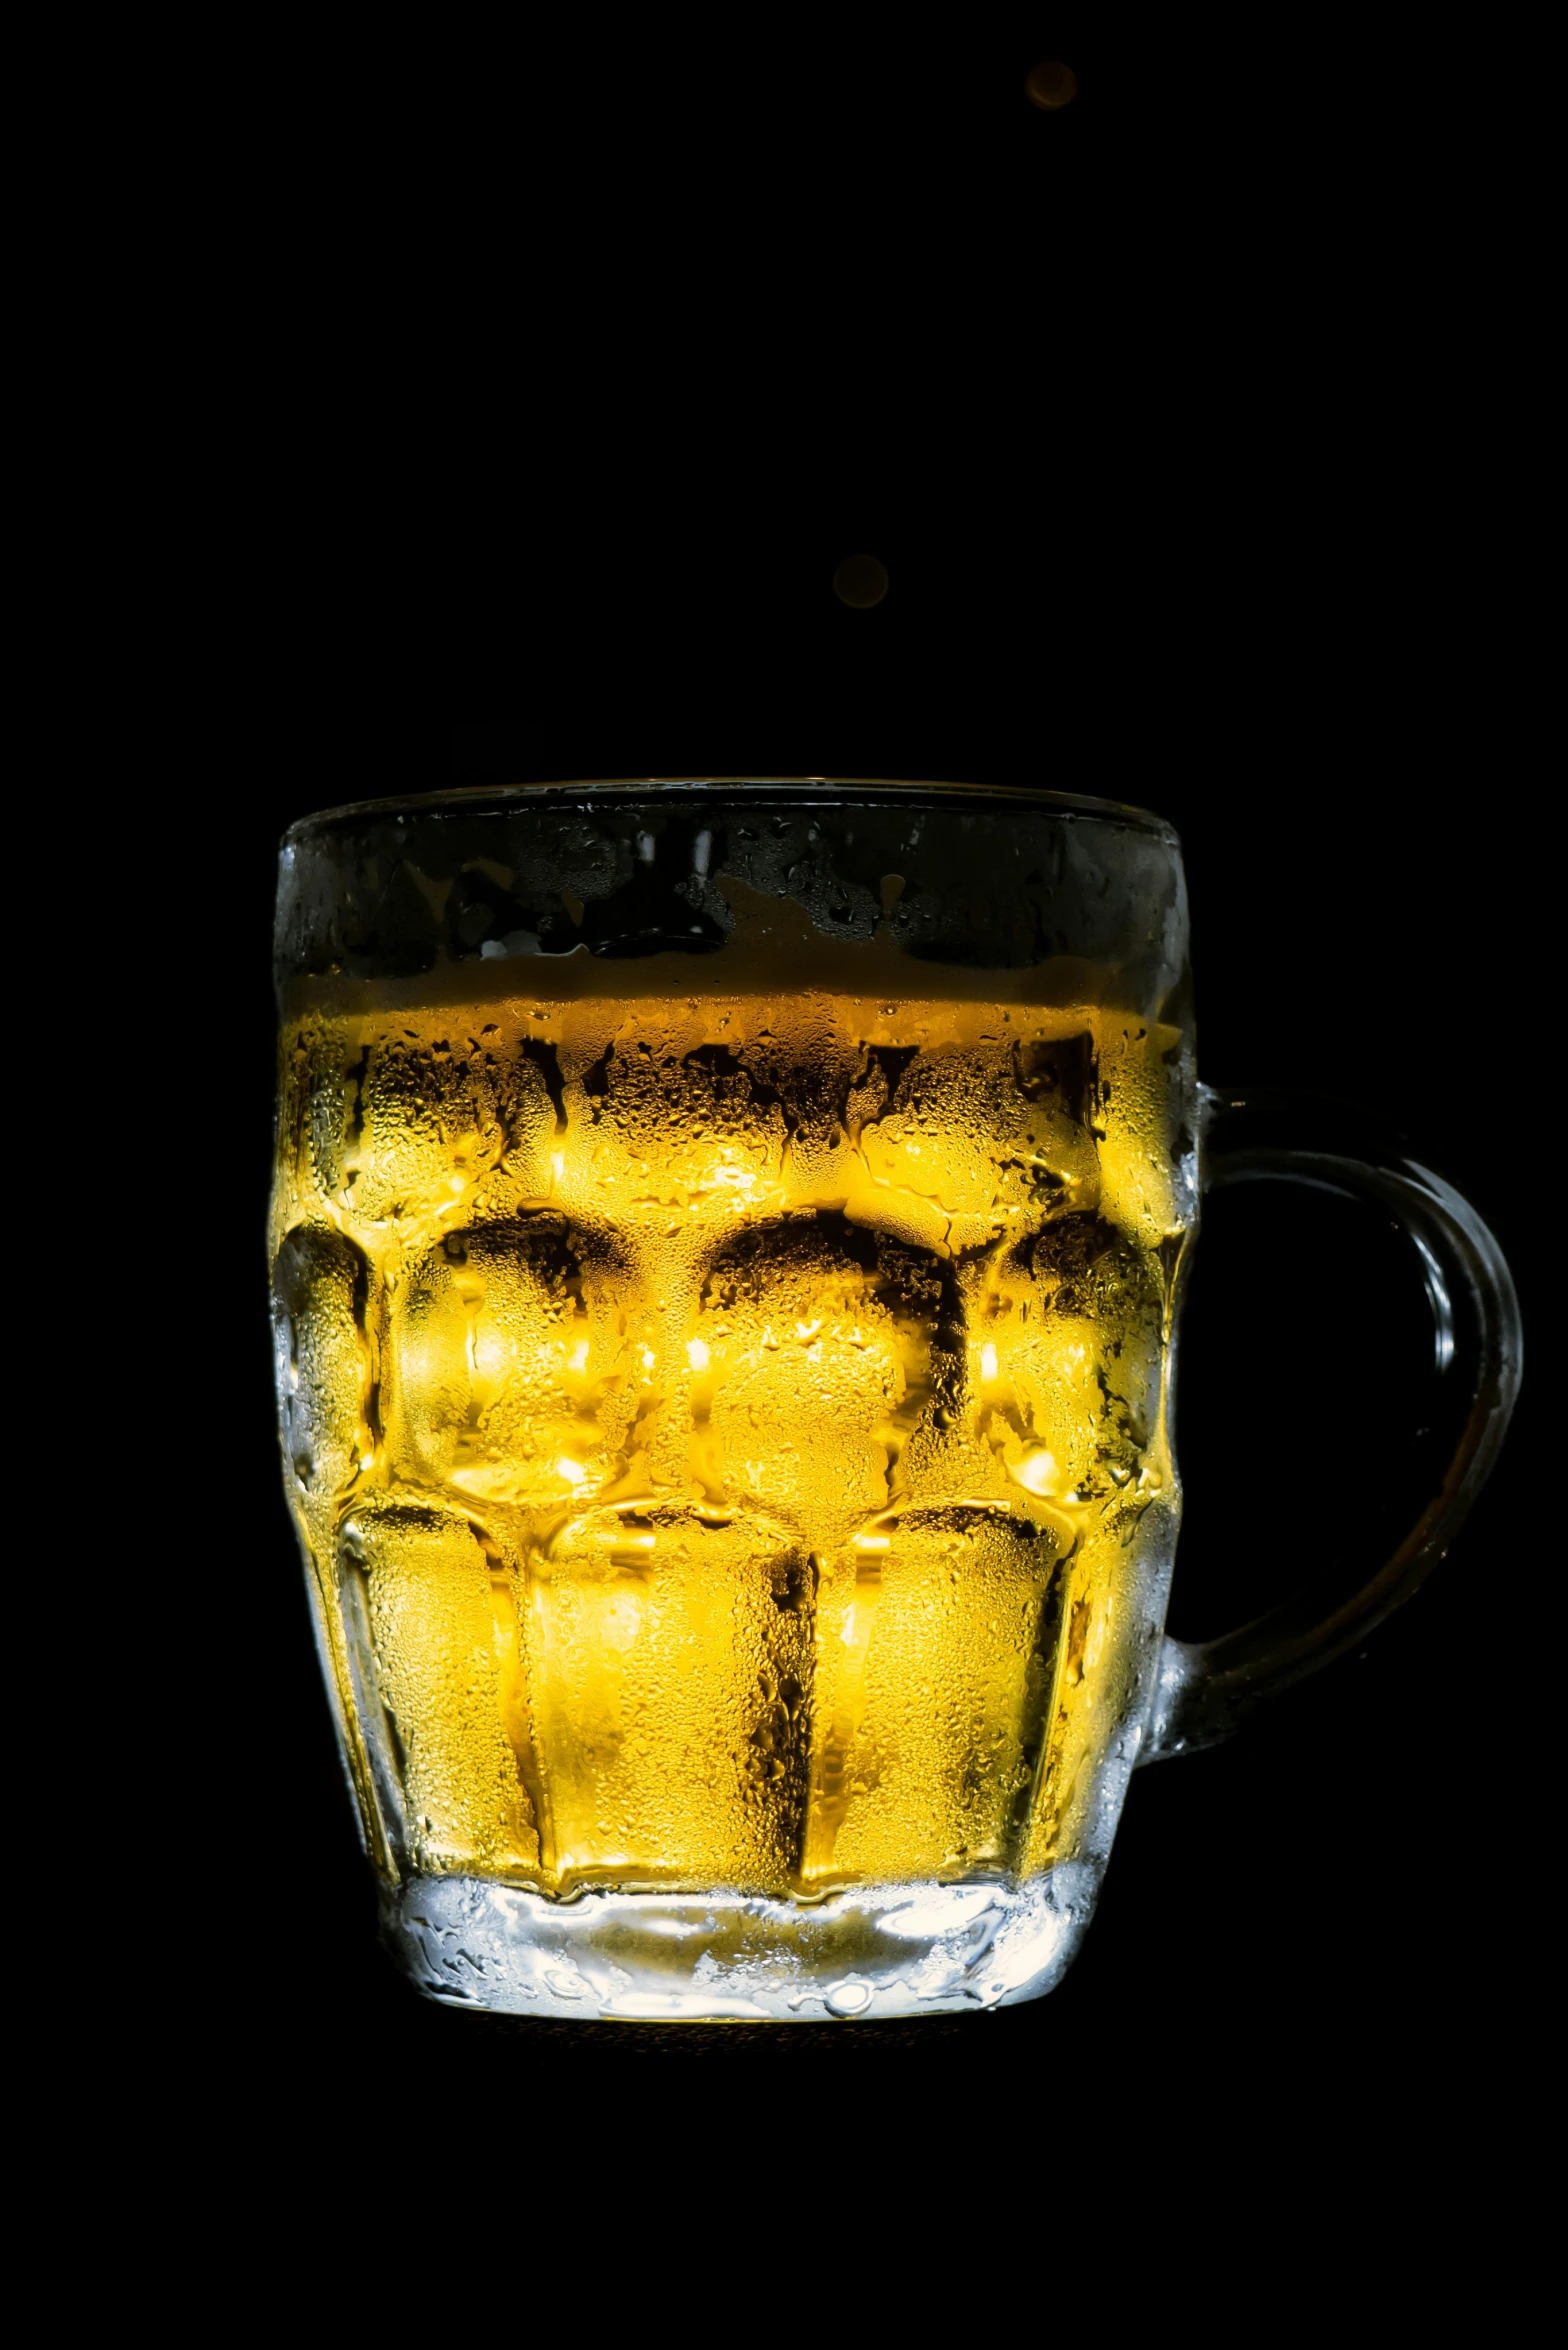 a mug with ice cubes in it against a black background